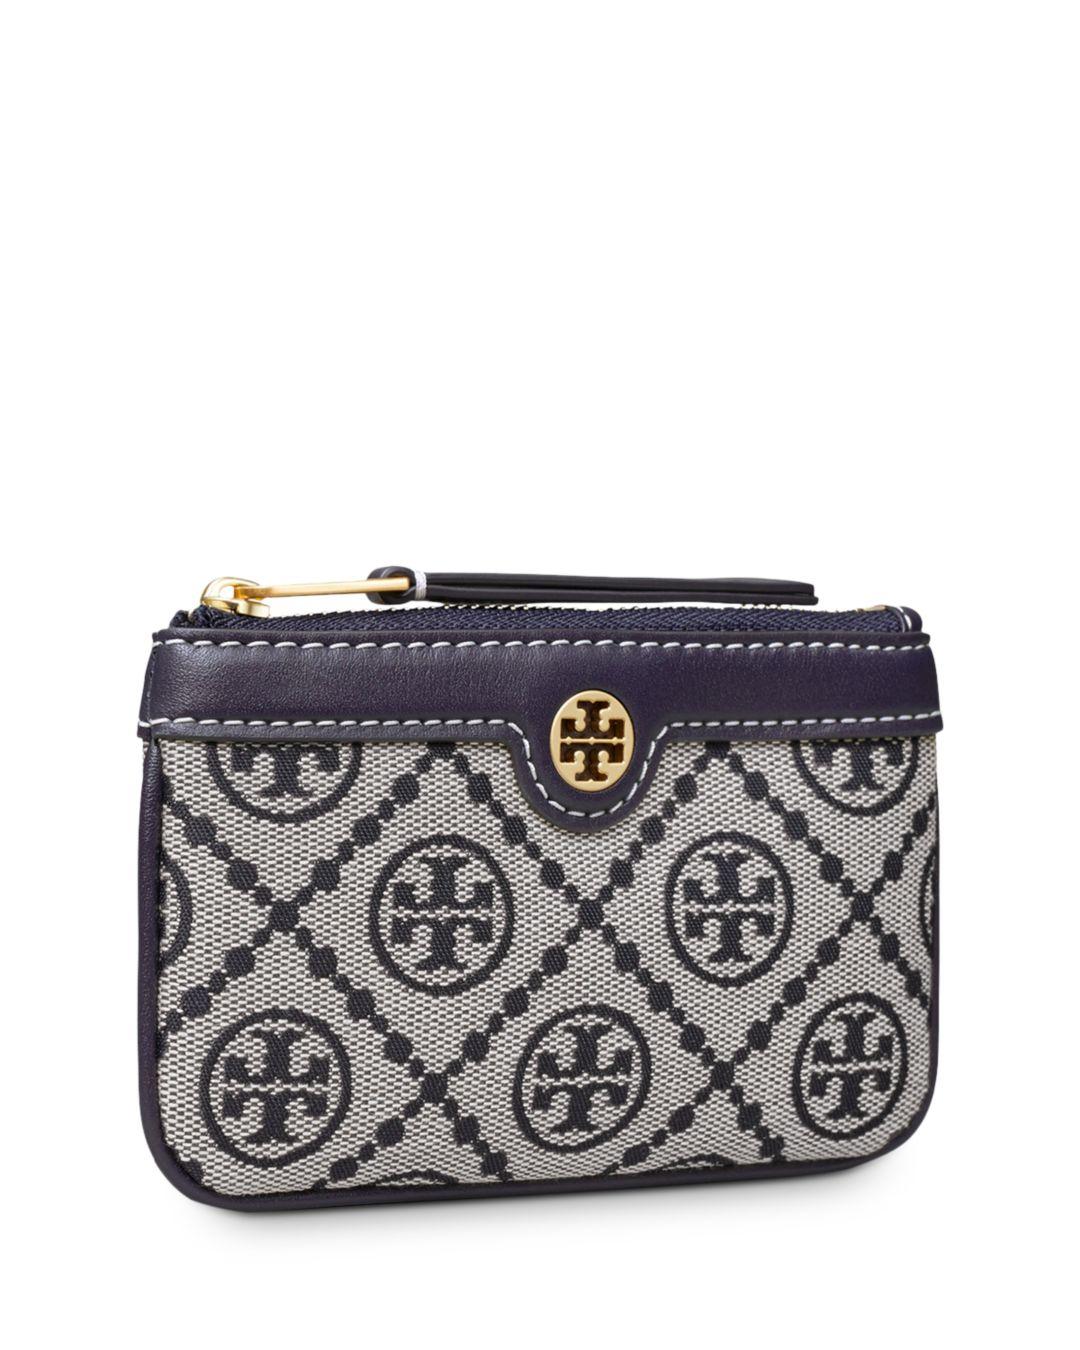 Tory Burch Leather T Monogram Card Case Key Ring in Navy Blue 